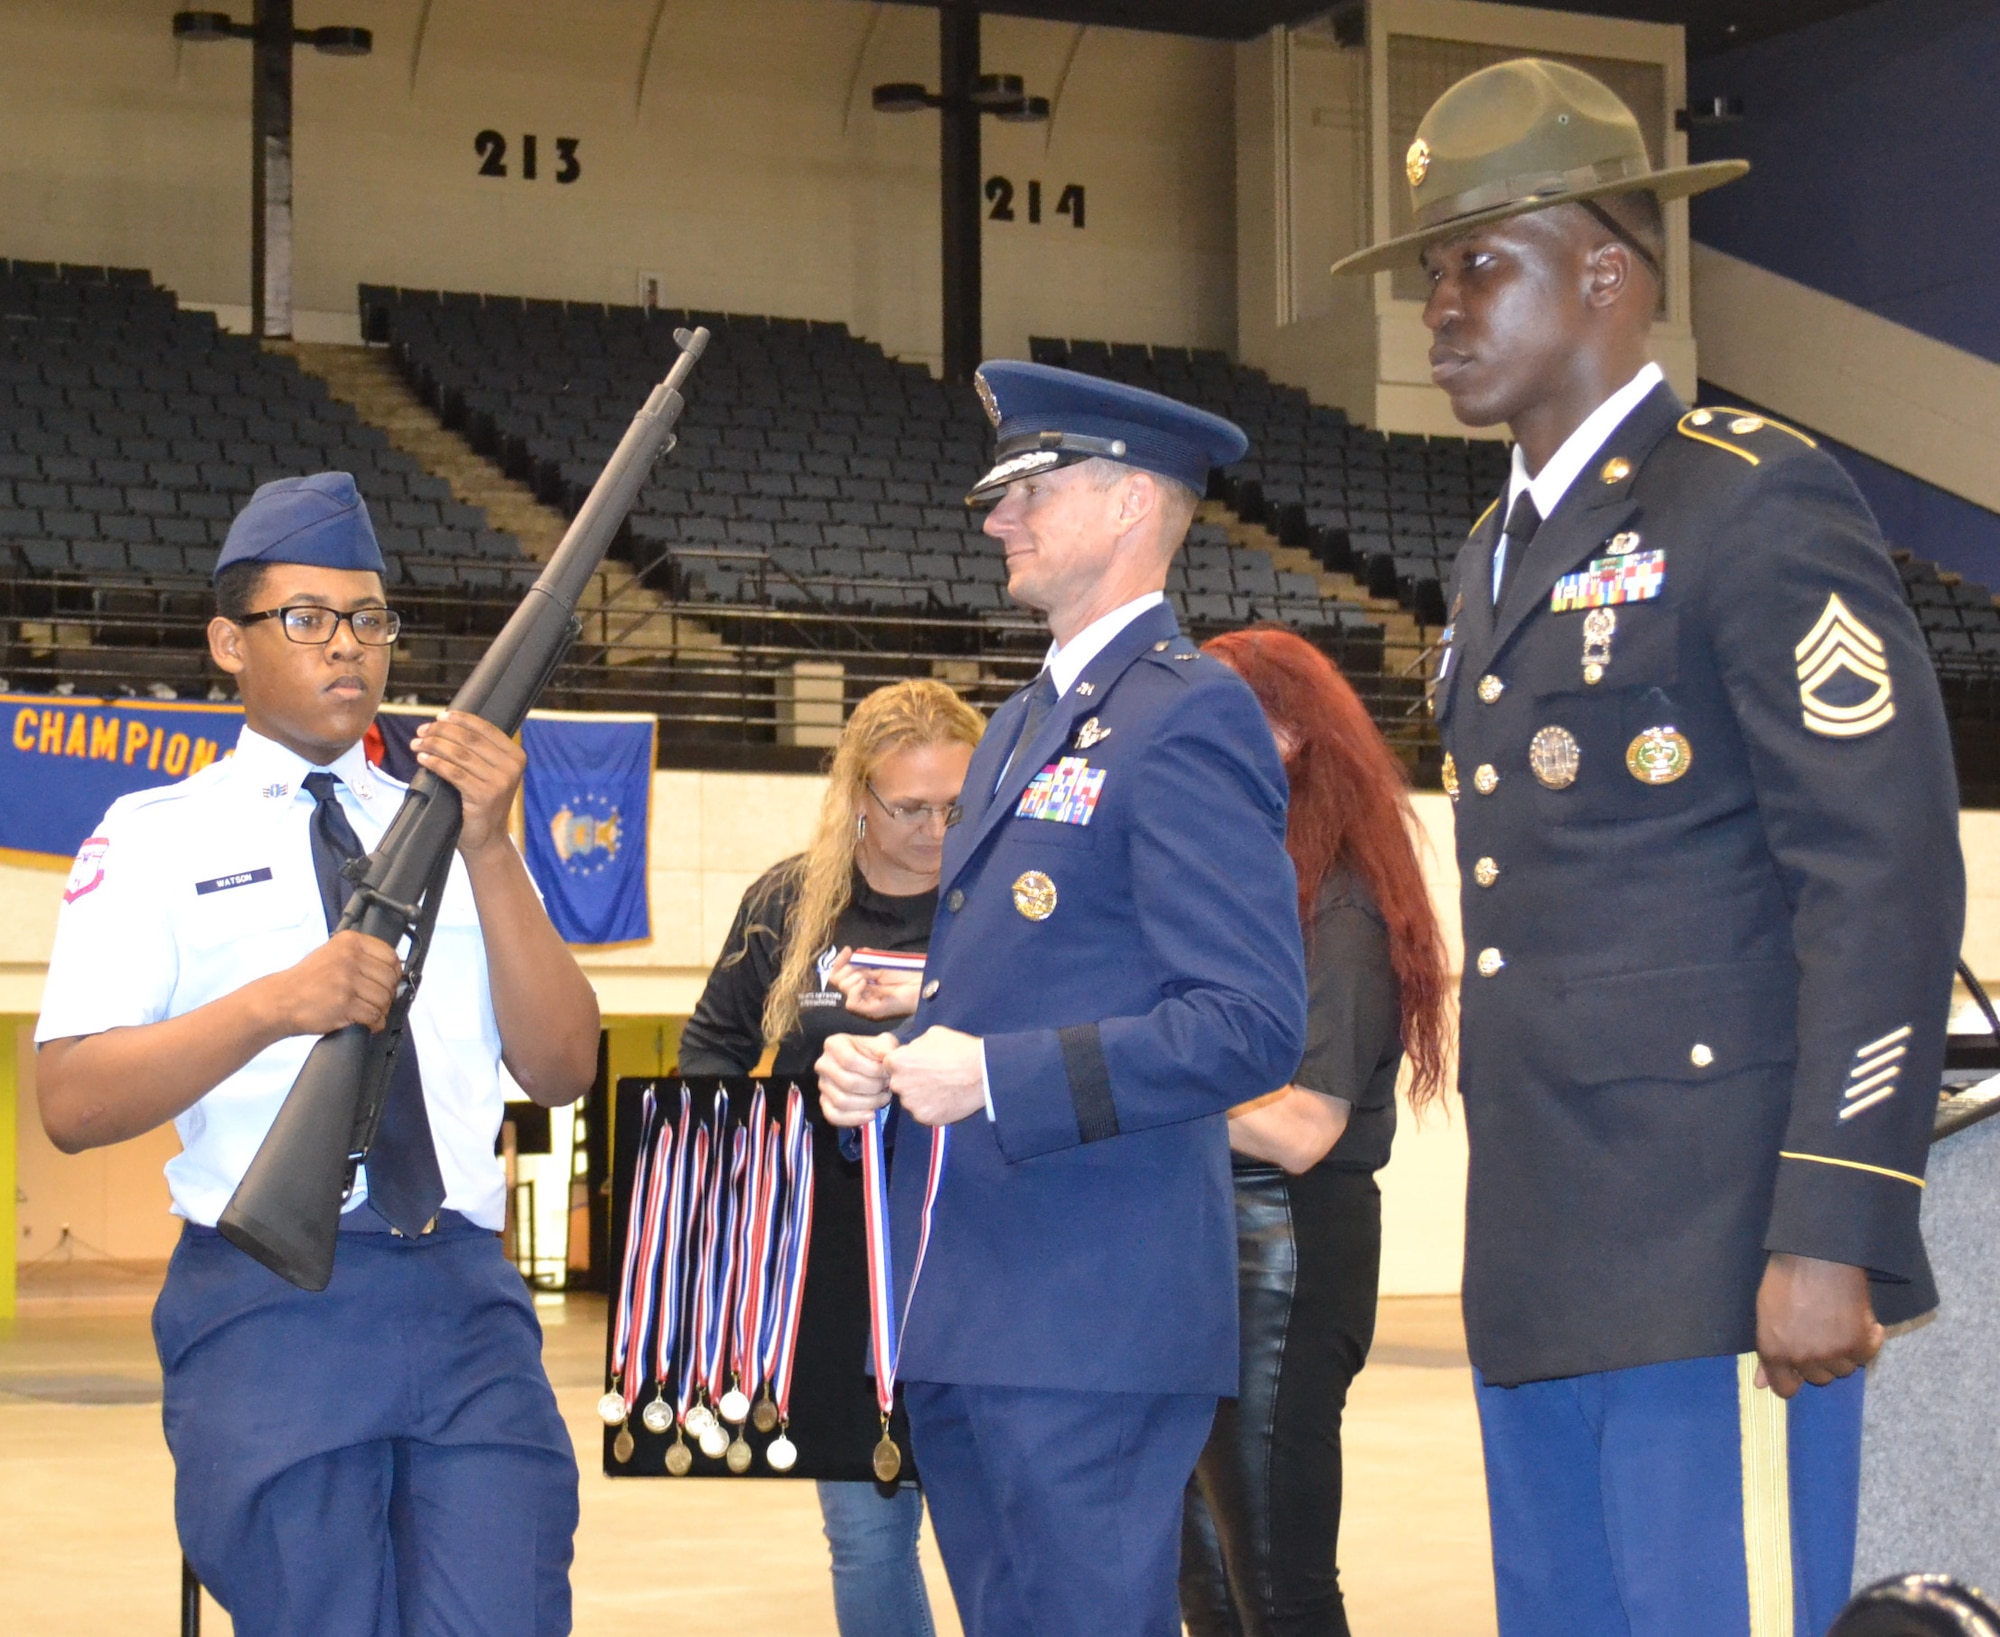 U.S. Air Force Brig. Gen. Christopher Niemi, Holm Center commander from Maxwell Air Force Base, Ala.,  presents a medal to Cadet Isaiah Watson, West Aurora High School, Ill., for his second place win in the Demilitarized Armed Knockout Competition at the National High School Drill Team Competition, May 3-5 2019, at Daytona Beach, Fla.  Cadet Watson beat out more than 500 cadets in a mass formation competition where cadets get ‘knocked out’ for not executing commands perfectly.